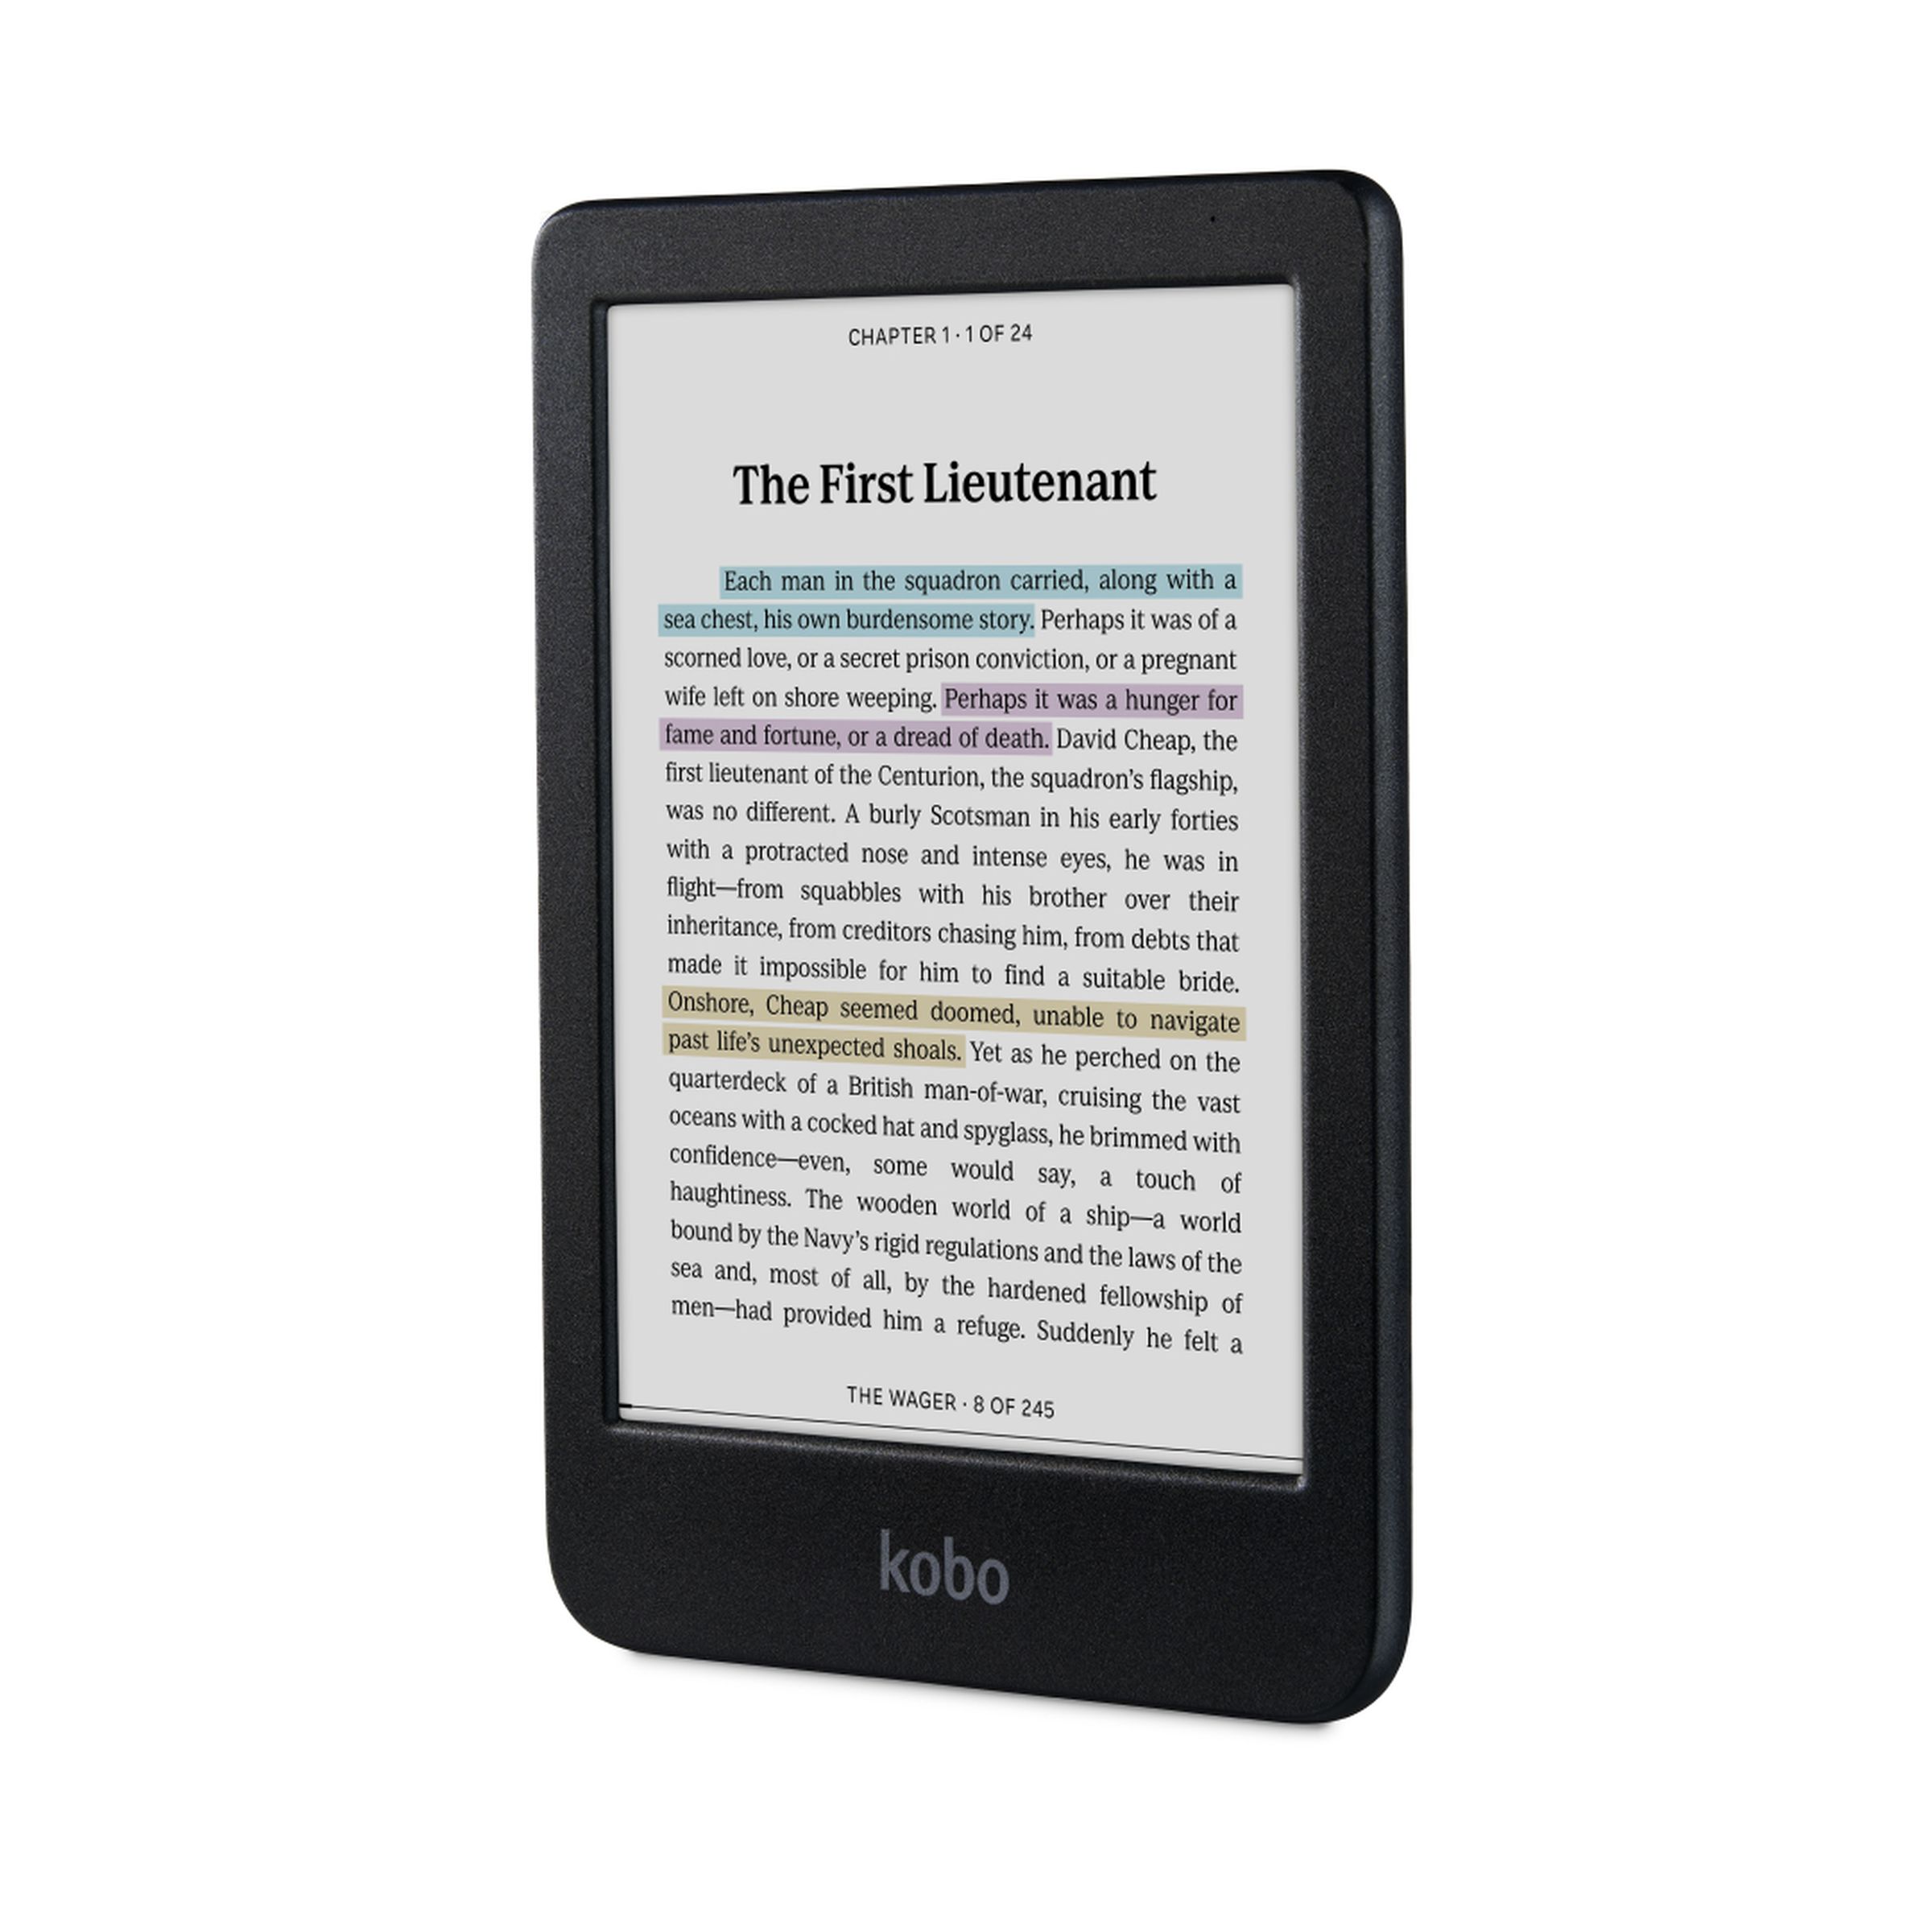 The Kobo Clara Colour is just like the Clara 2E but with color, an improved processor, and more storage.